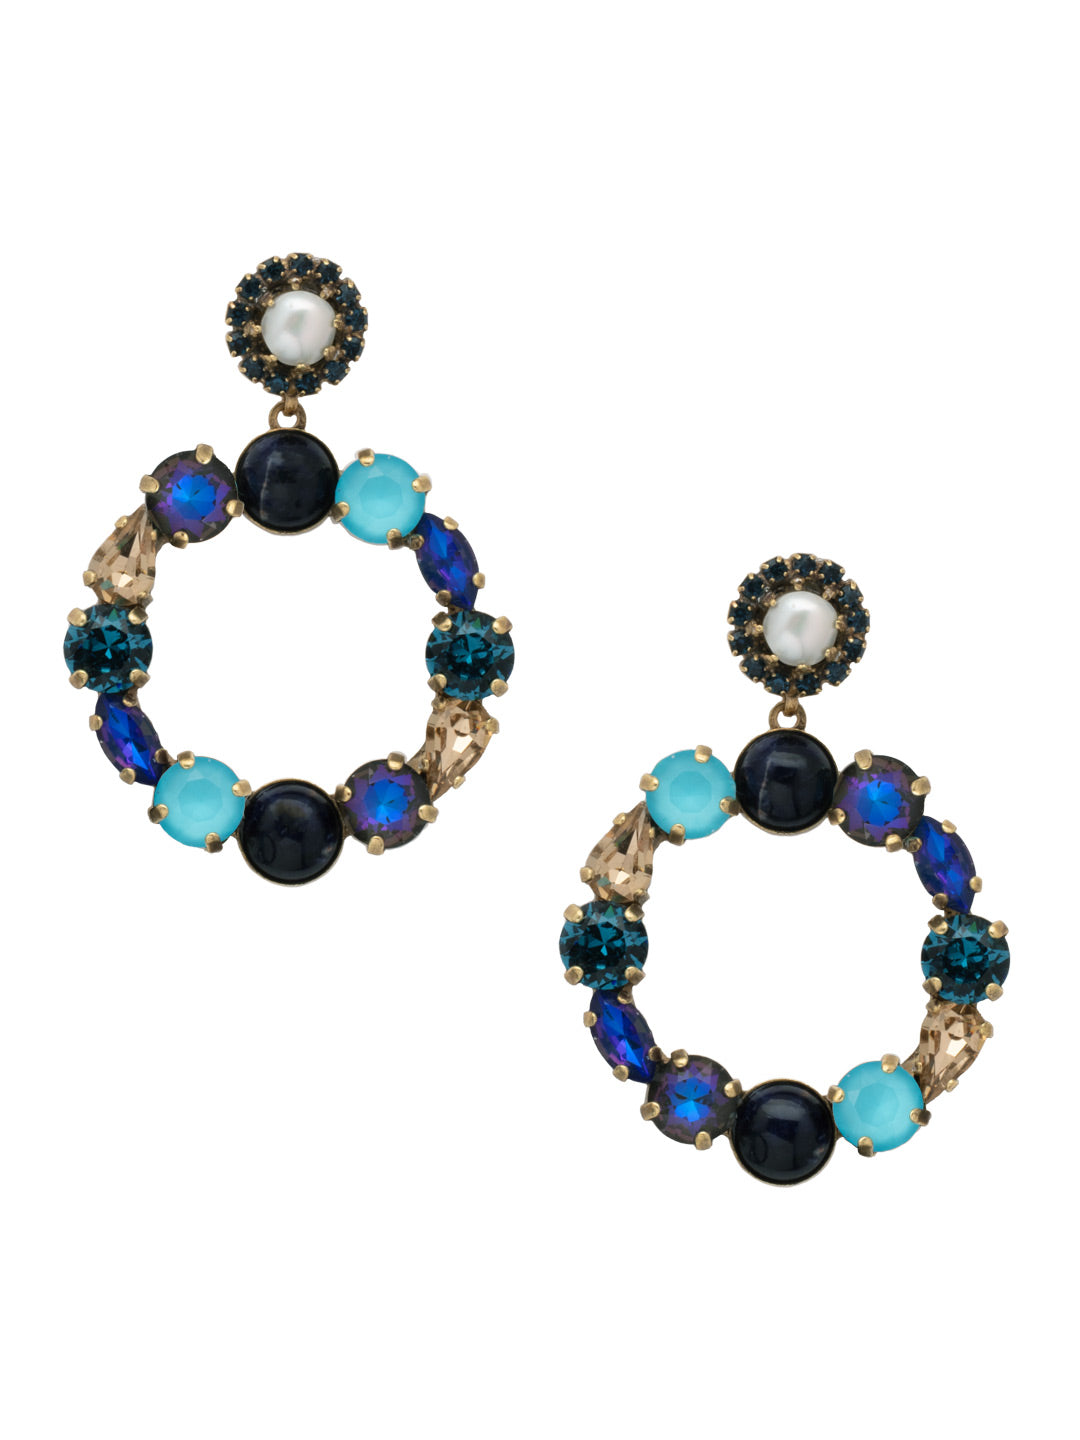 Shoshanna Dangle Statement Earring - EFC33AGVBN - <p>The Shoshanna Dangle Statement Earrings feature a dramatic hoop lined with various crystals, hanging from a freshwater pearl surrounded by a halo of crystals. From Sorrelli's Venice Blue collection in our Antique Gold-tone finish.</p>